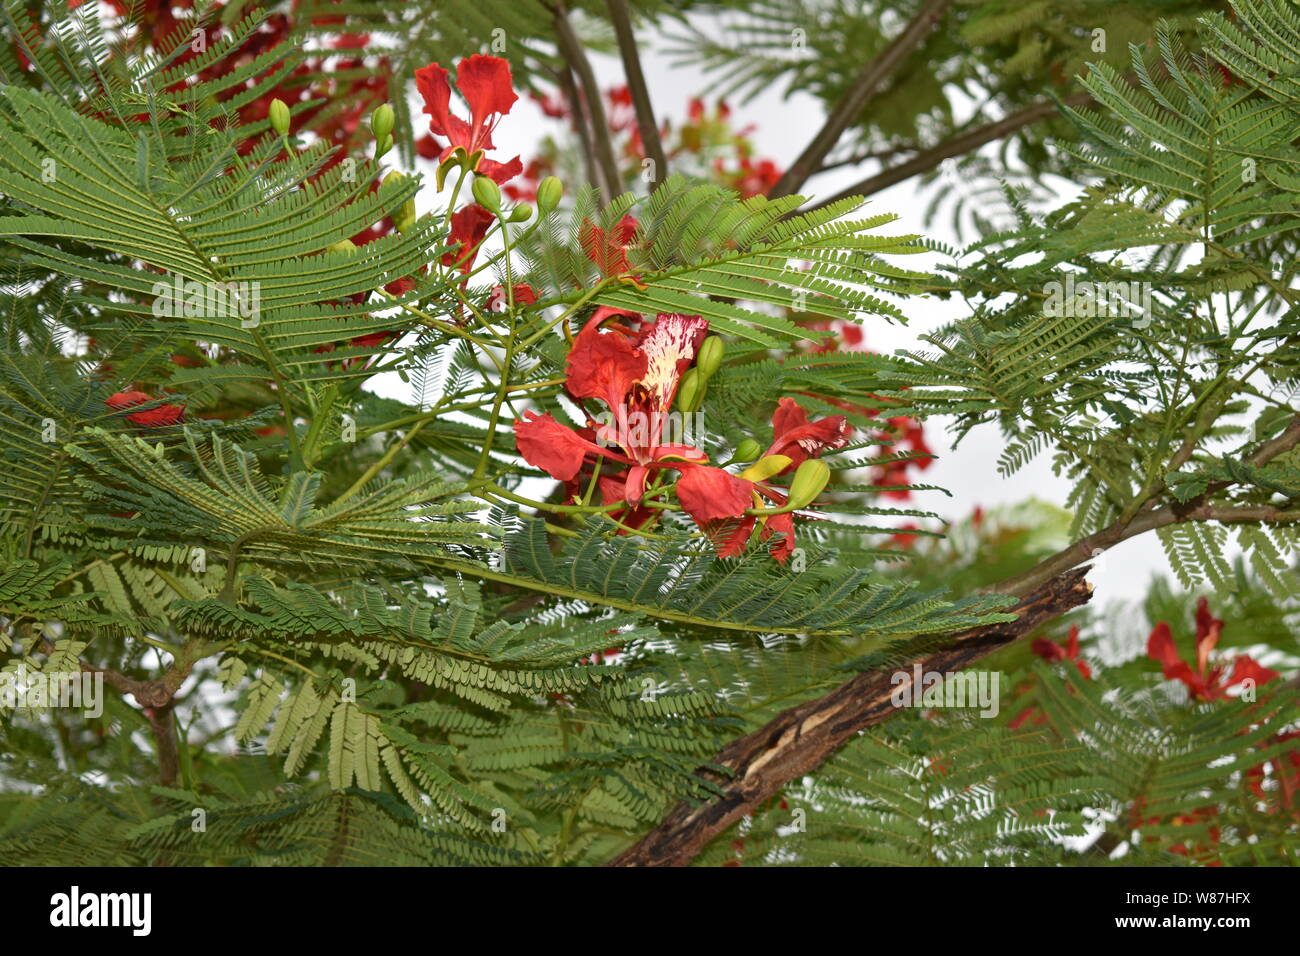 RED PEACOCK FLOWERS ON GREEN POINCIANA TREE Stock Photo - Alamy